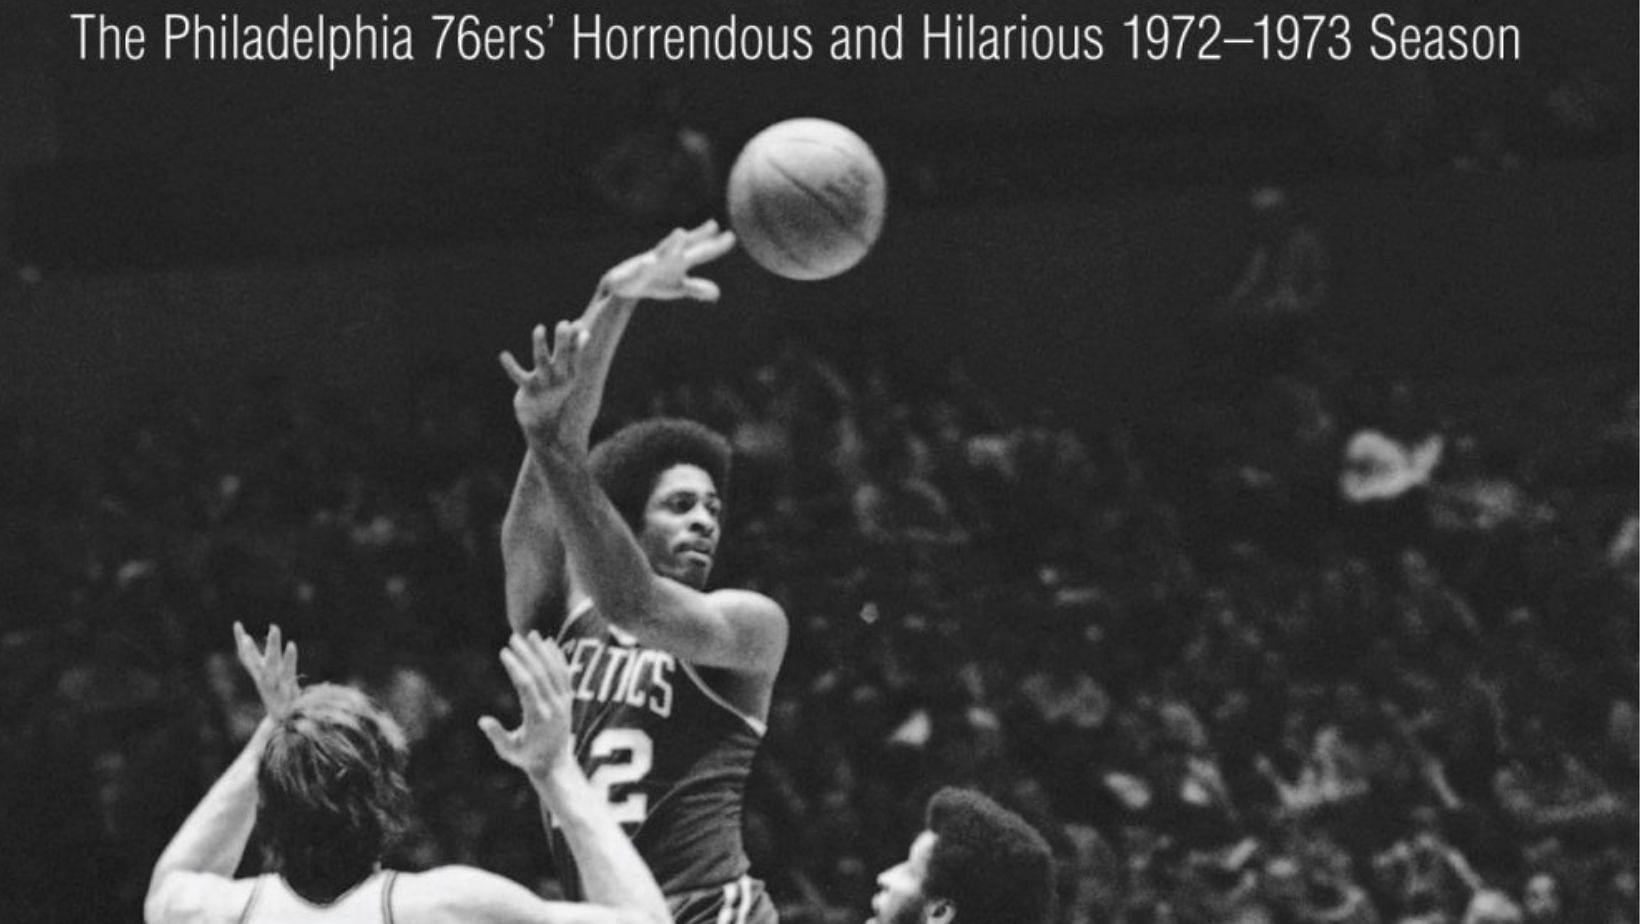 The Philadelphia 76ers finished the 1972-73 season with a 9-73 record, the worst in NBA history.